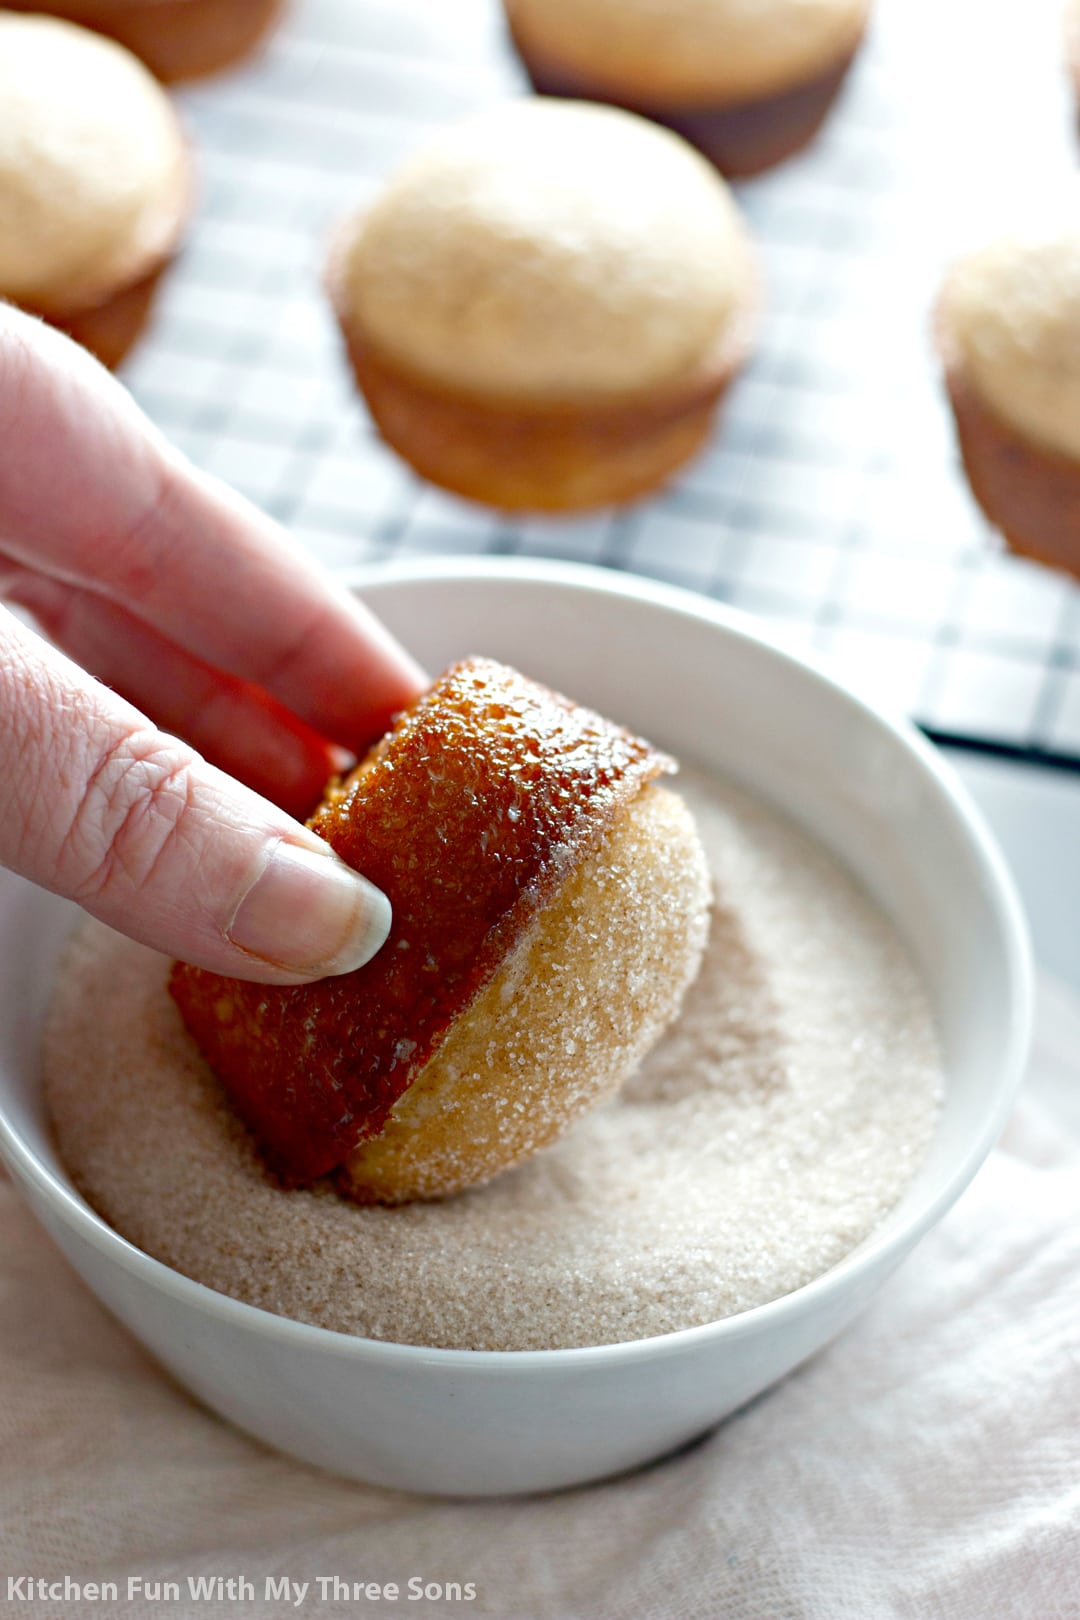 A butter-coated donut muffin being dipped into a bowl of cinnamon sugar